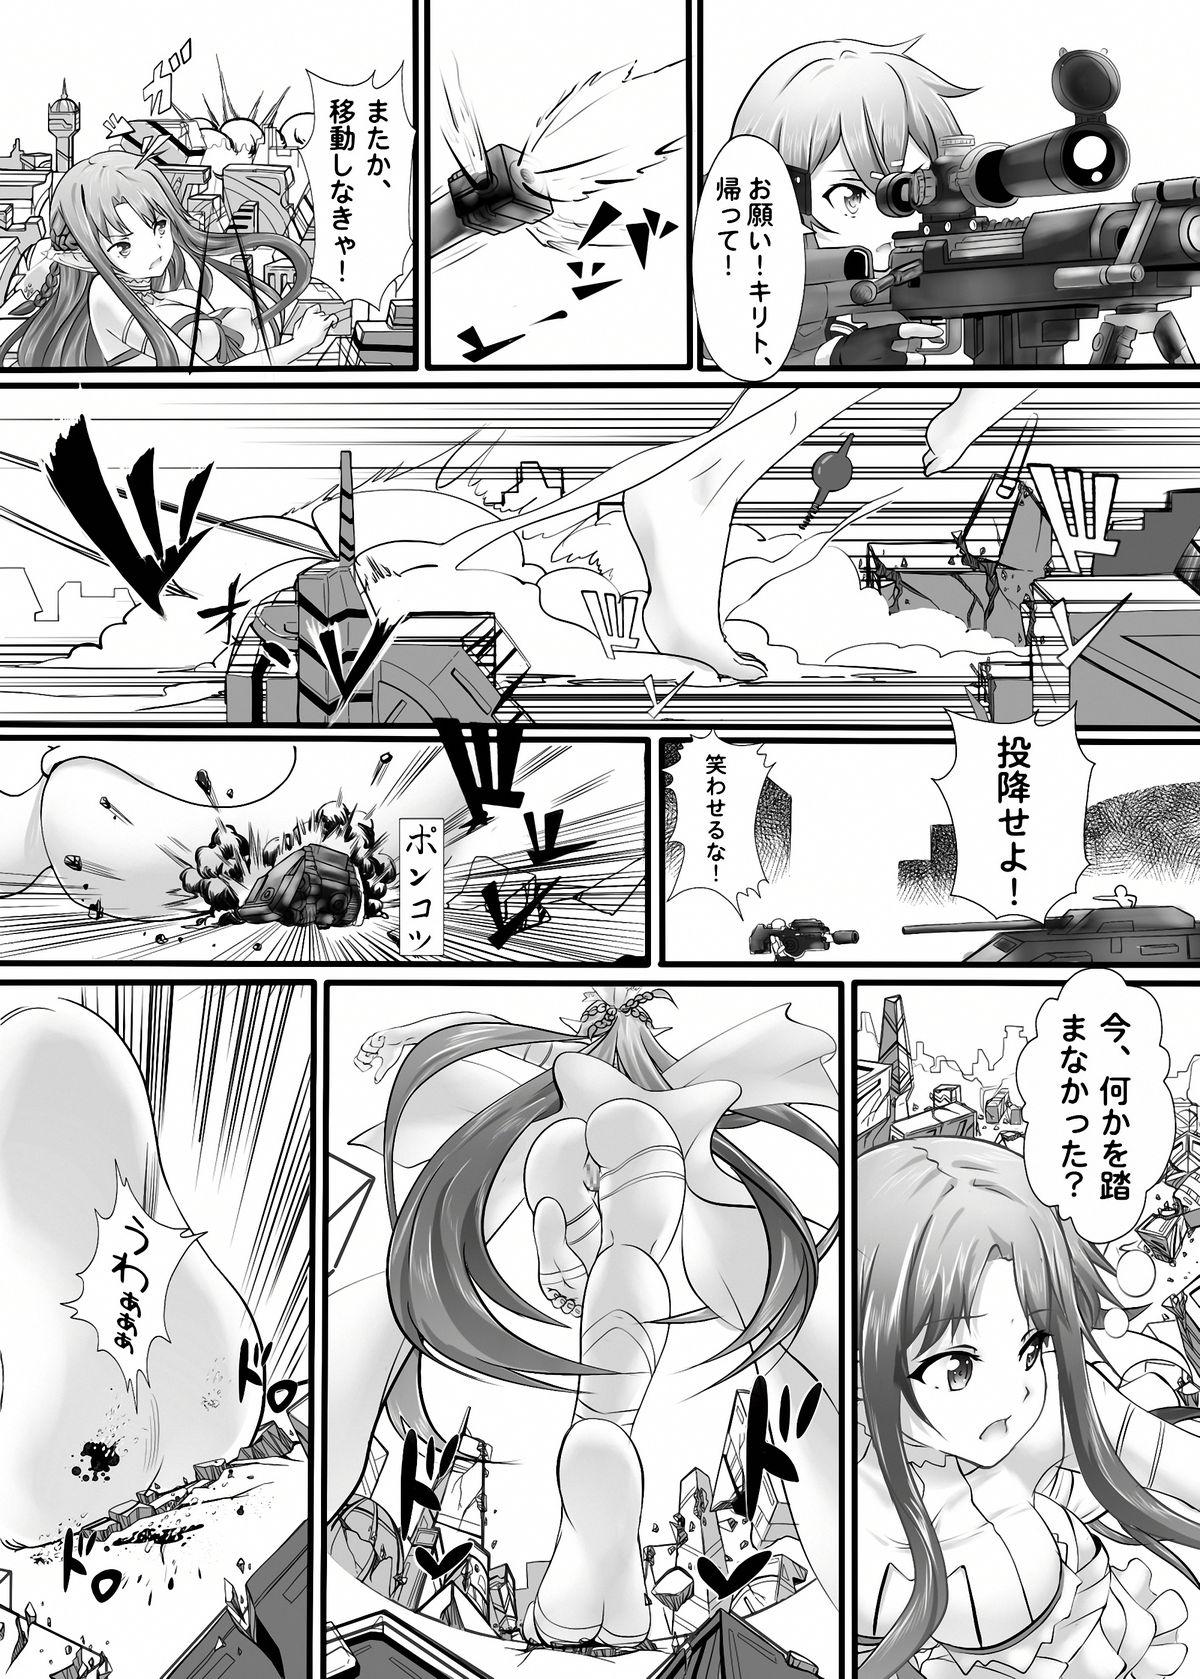 Class Room BUG ART ONLINE - Sword art online Chinese - Page 10